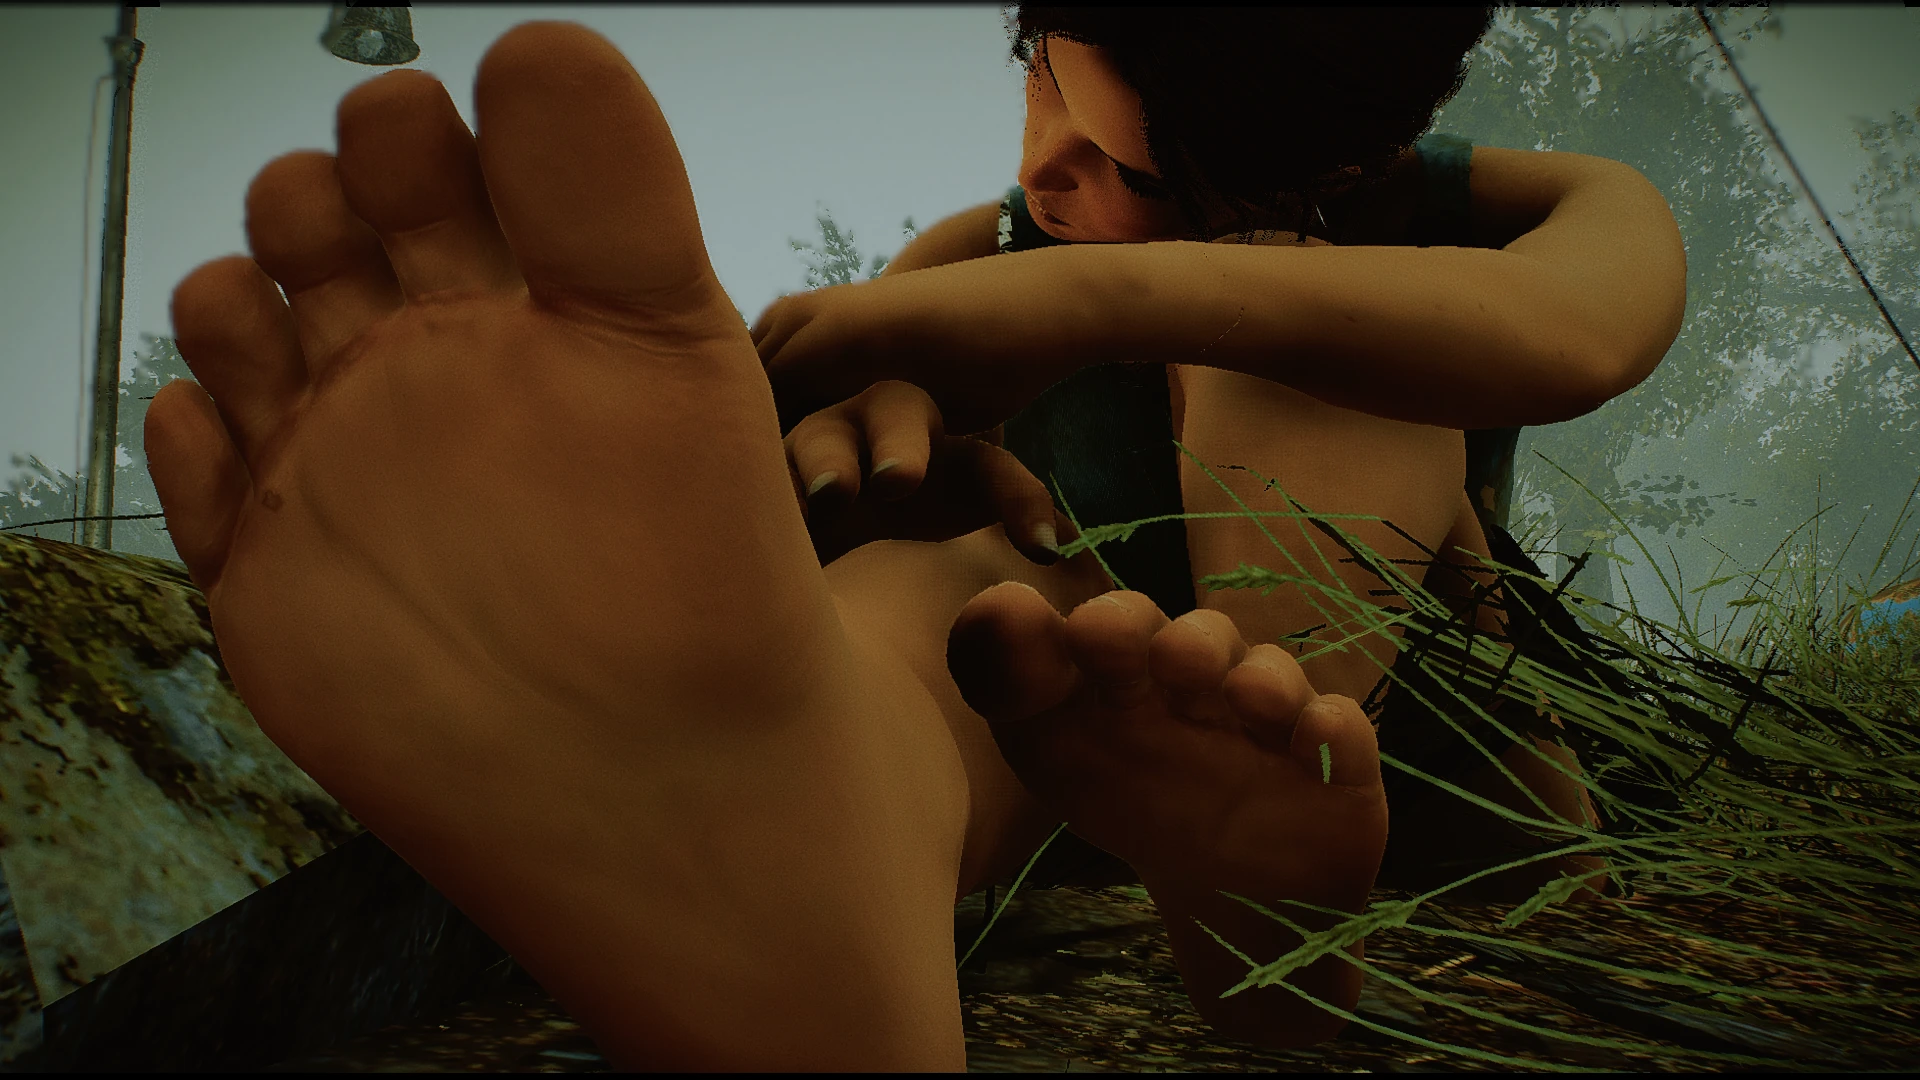 Lara Croft and Her feet at Fallout 4 Nexus - Mods and community